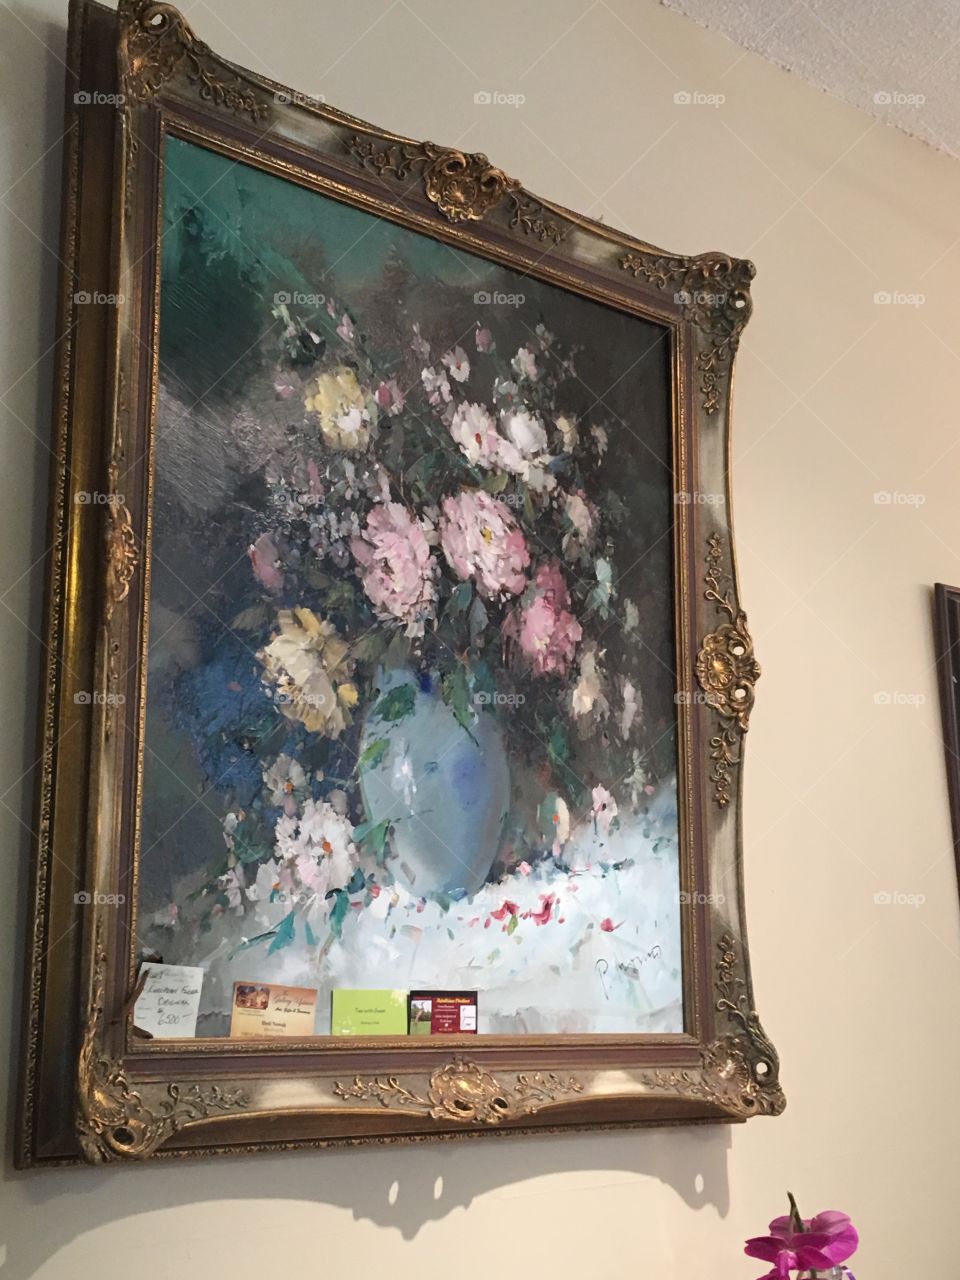 A floral painting on sale located in a tea house.